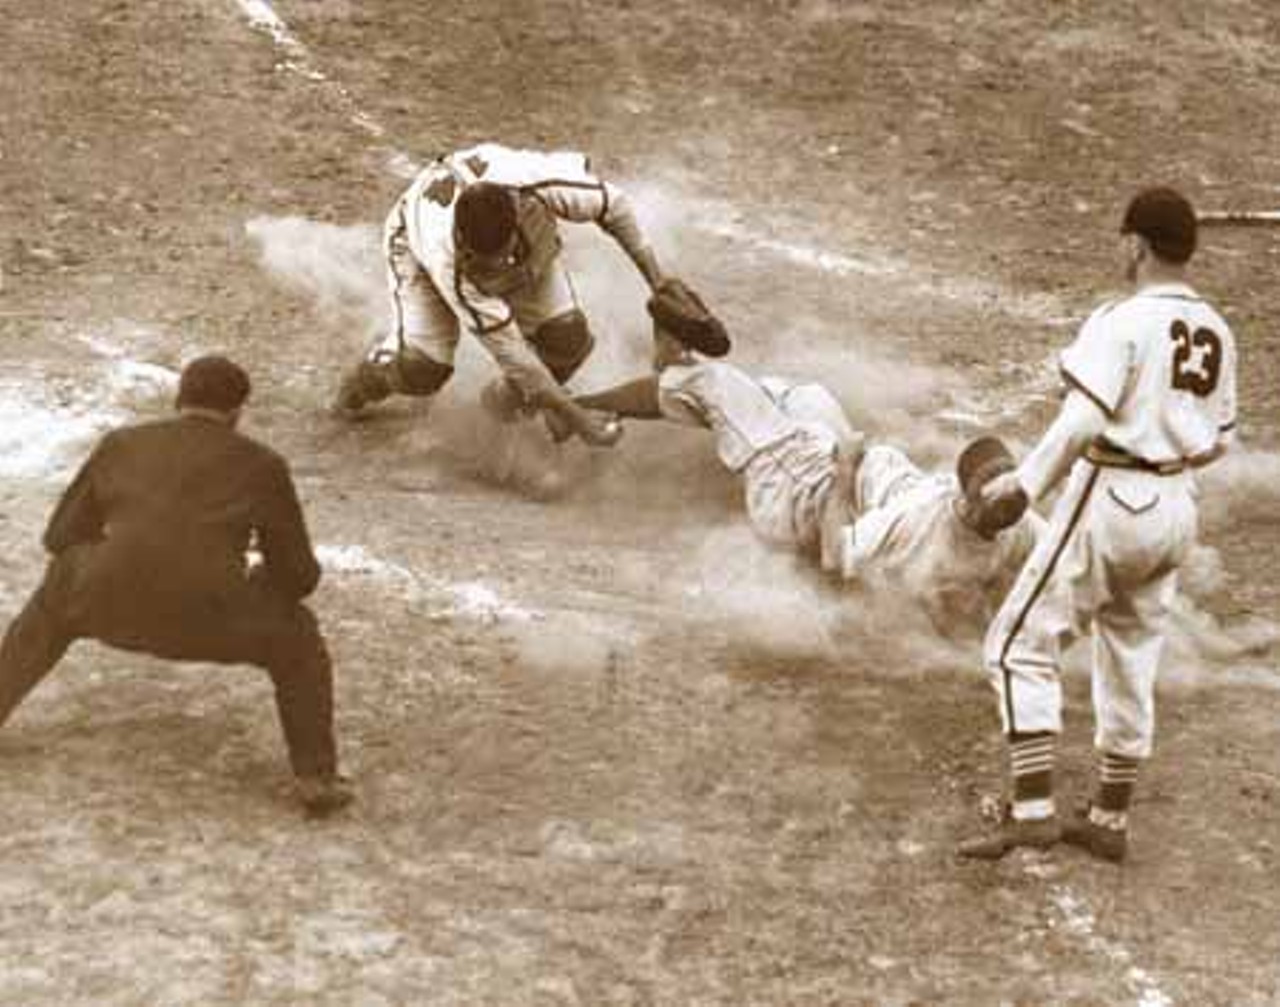 1941. Mickey Owen of the Brooklyn Dodgers is tagged out at home by Gus Mancuso of the Cardinals.